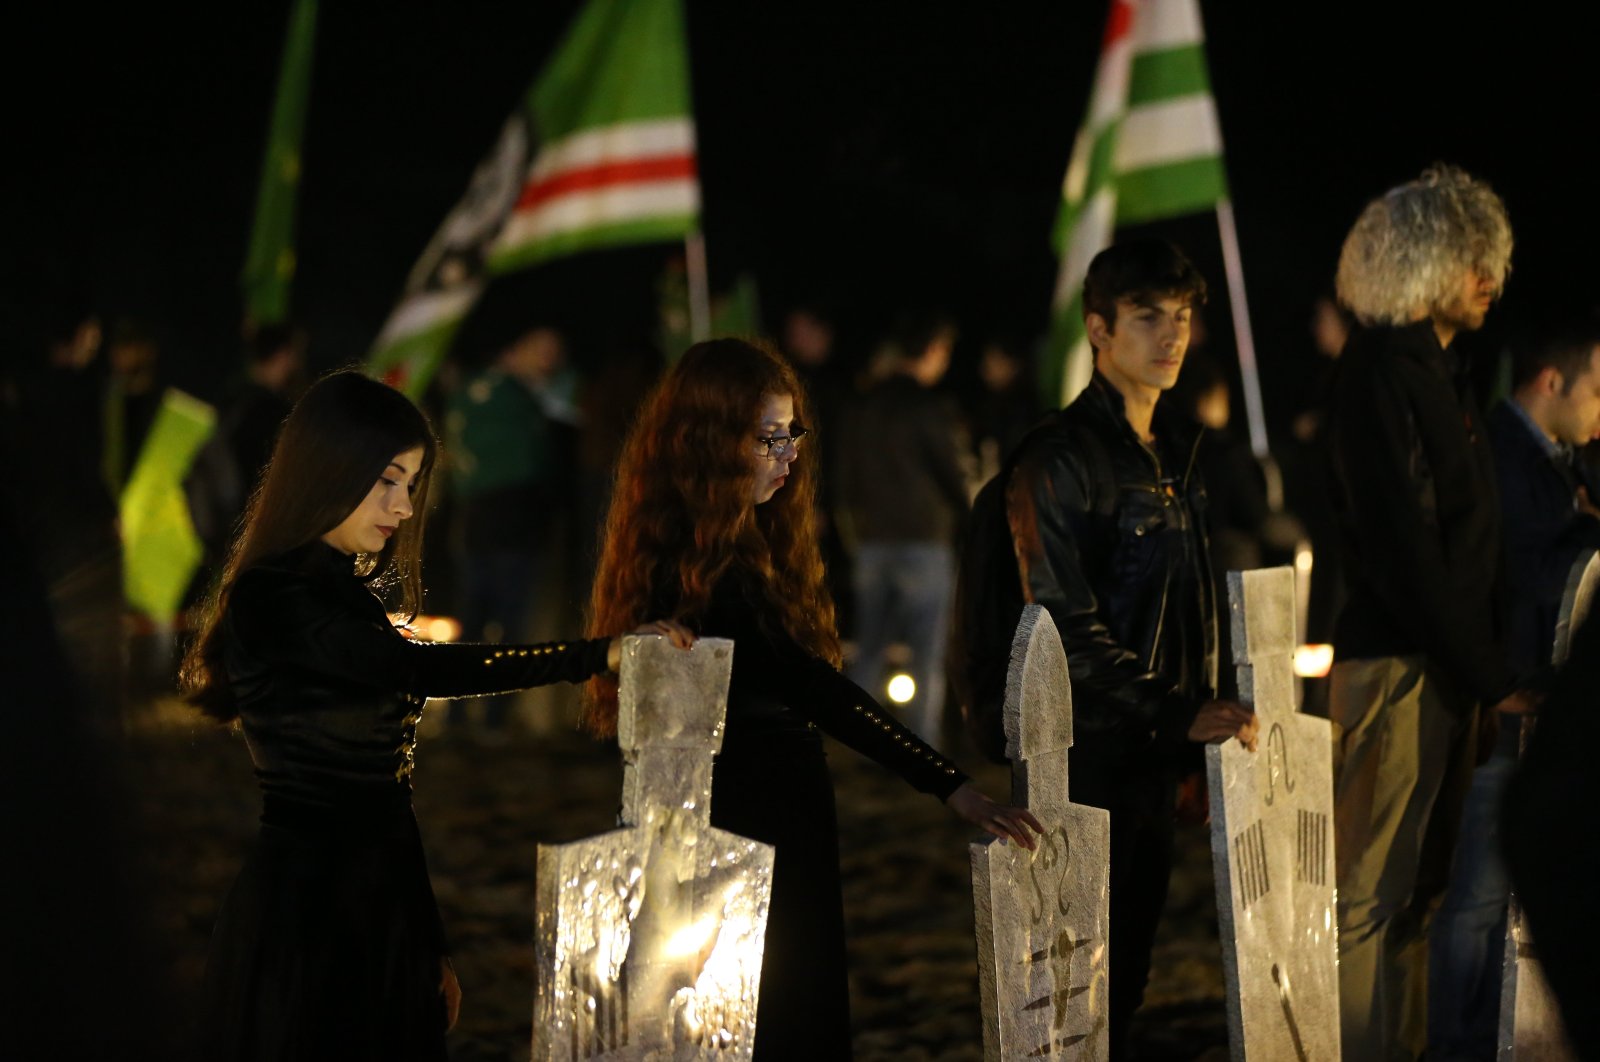 Members of the Circassian community commemorate those who lost their lives during mass deportation by the Russian Empire in 1864, northwestern Kocaeli province, Turkey, May 22, 2019. (AA Photo)